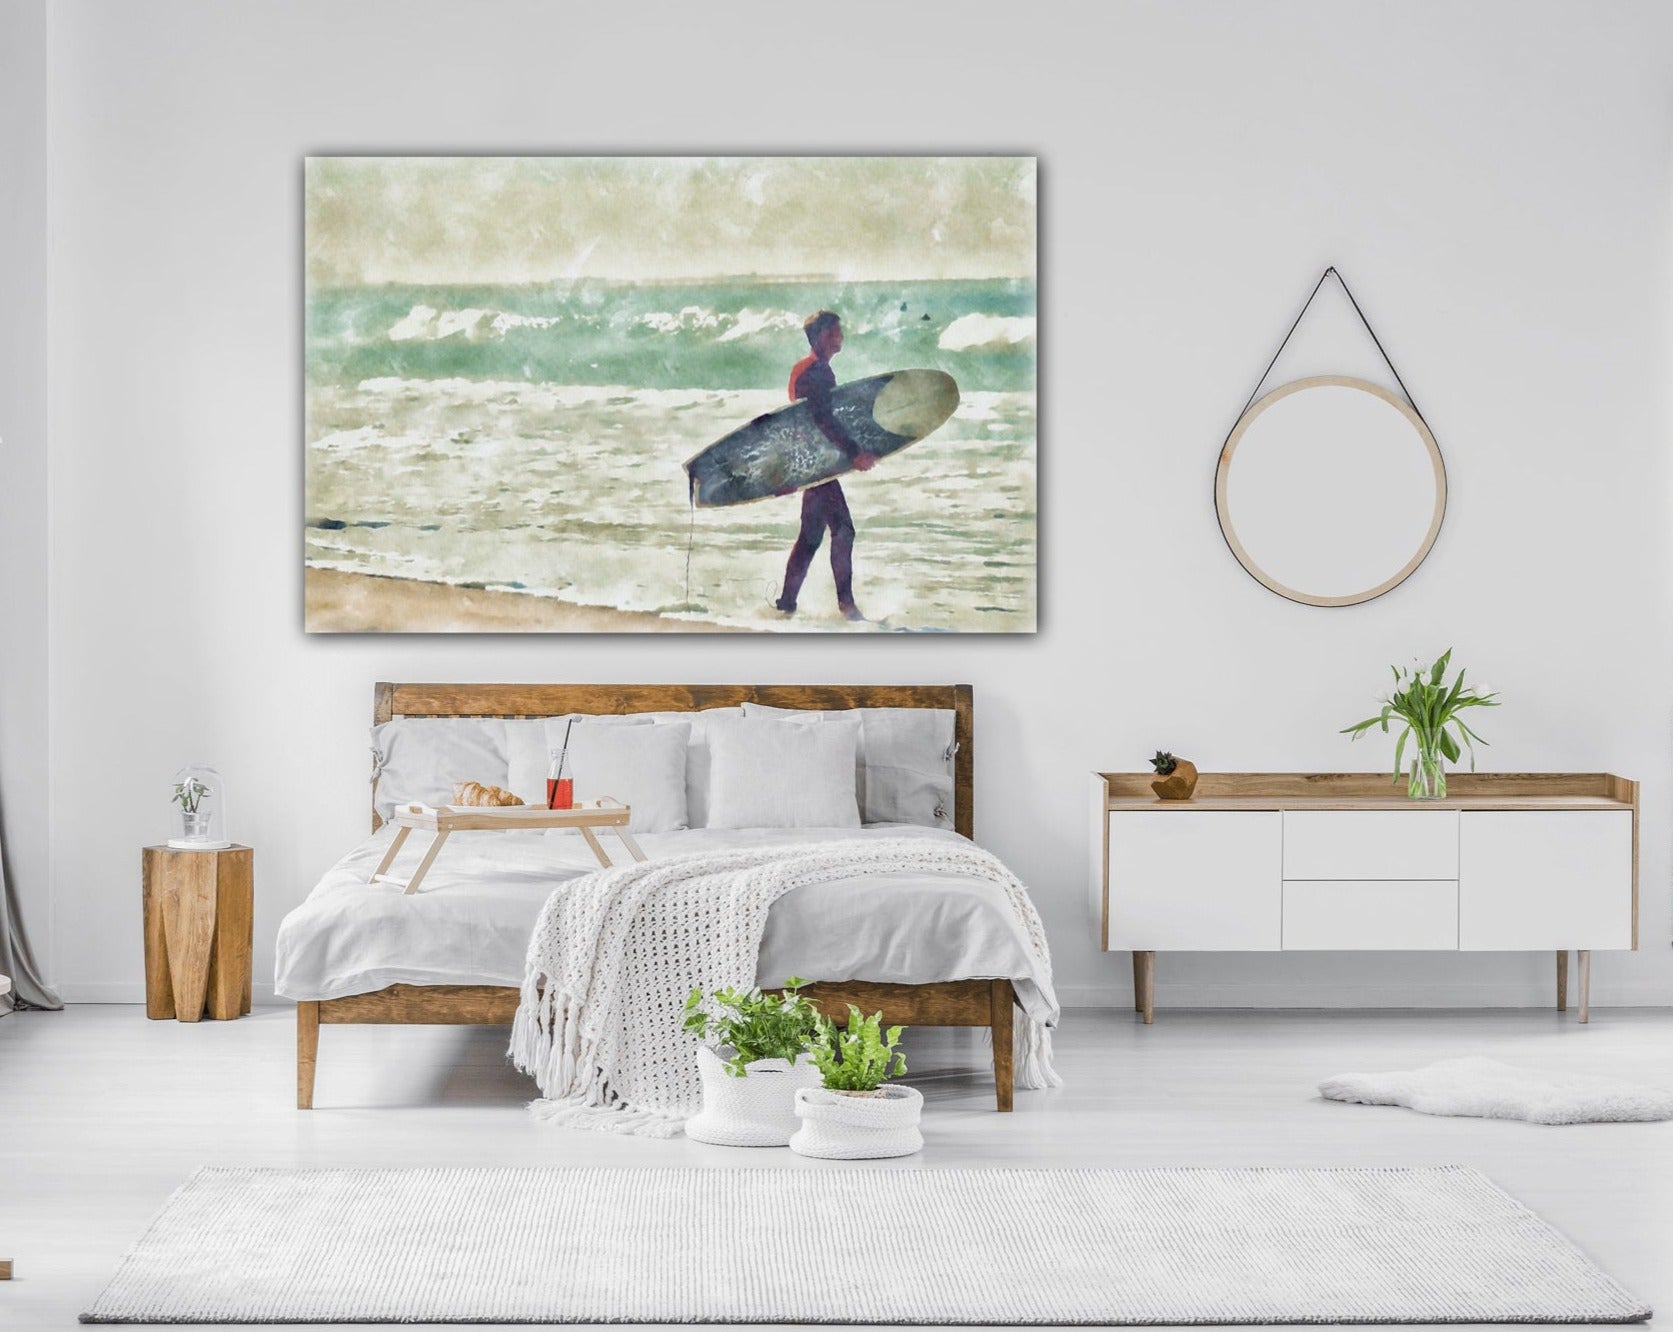 Heading out to surf bedroom canvas print by Jacqueline MB Designs 